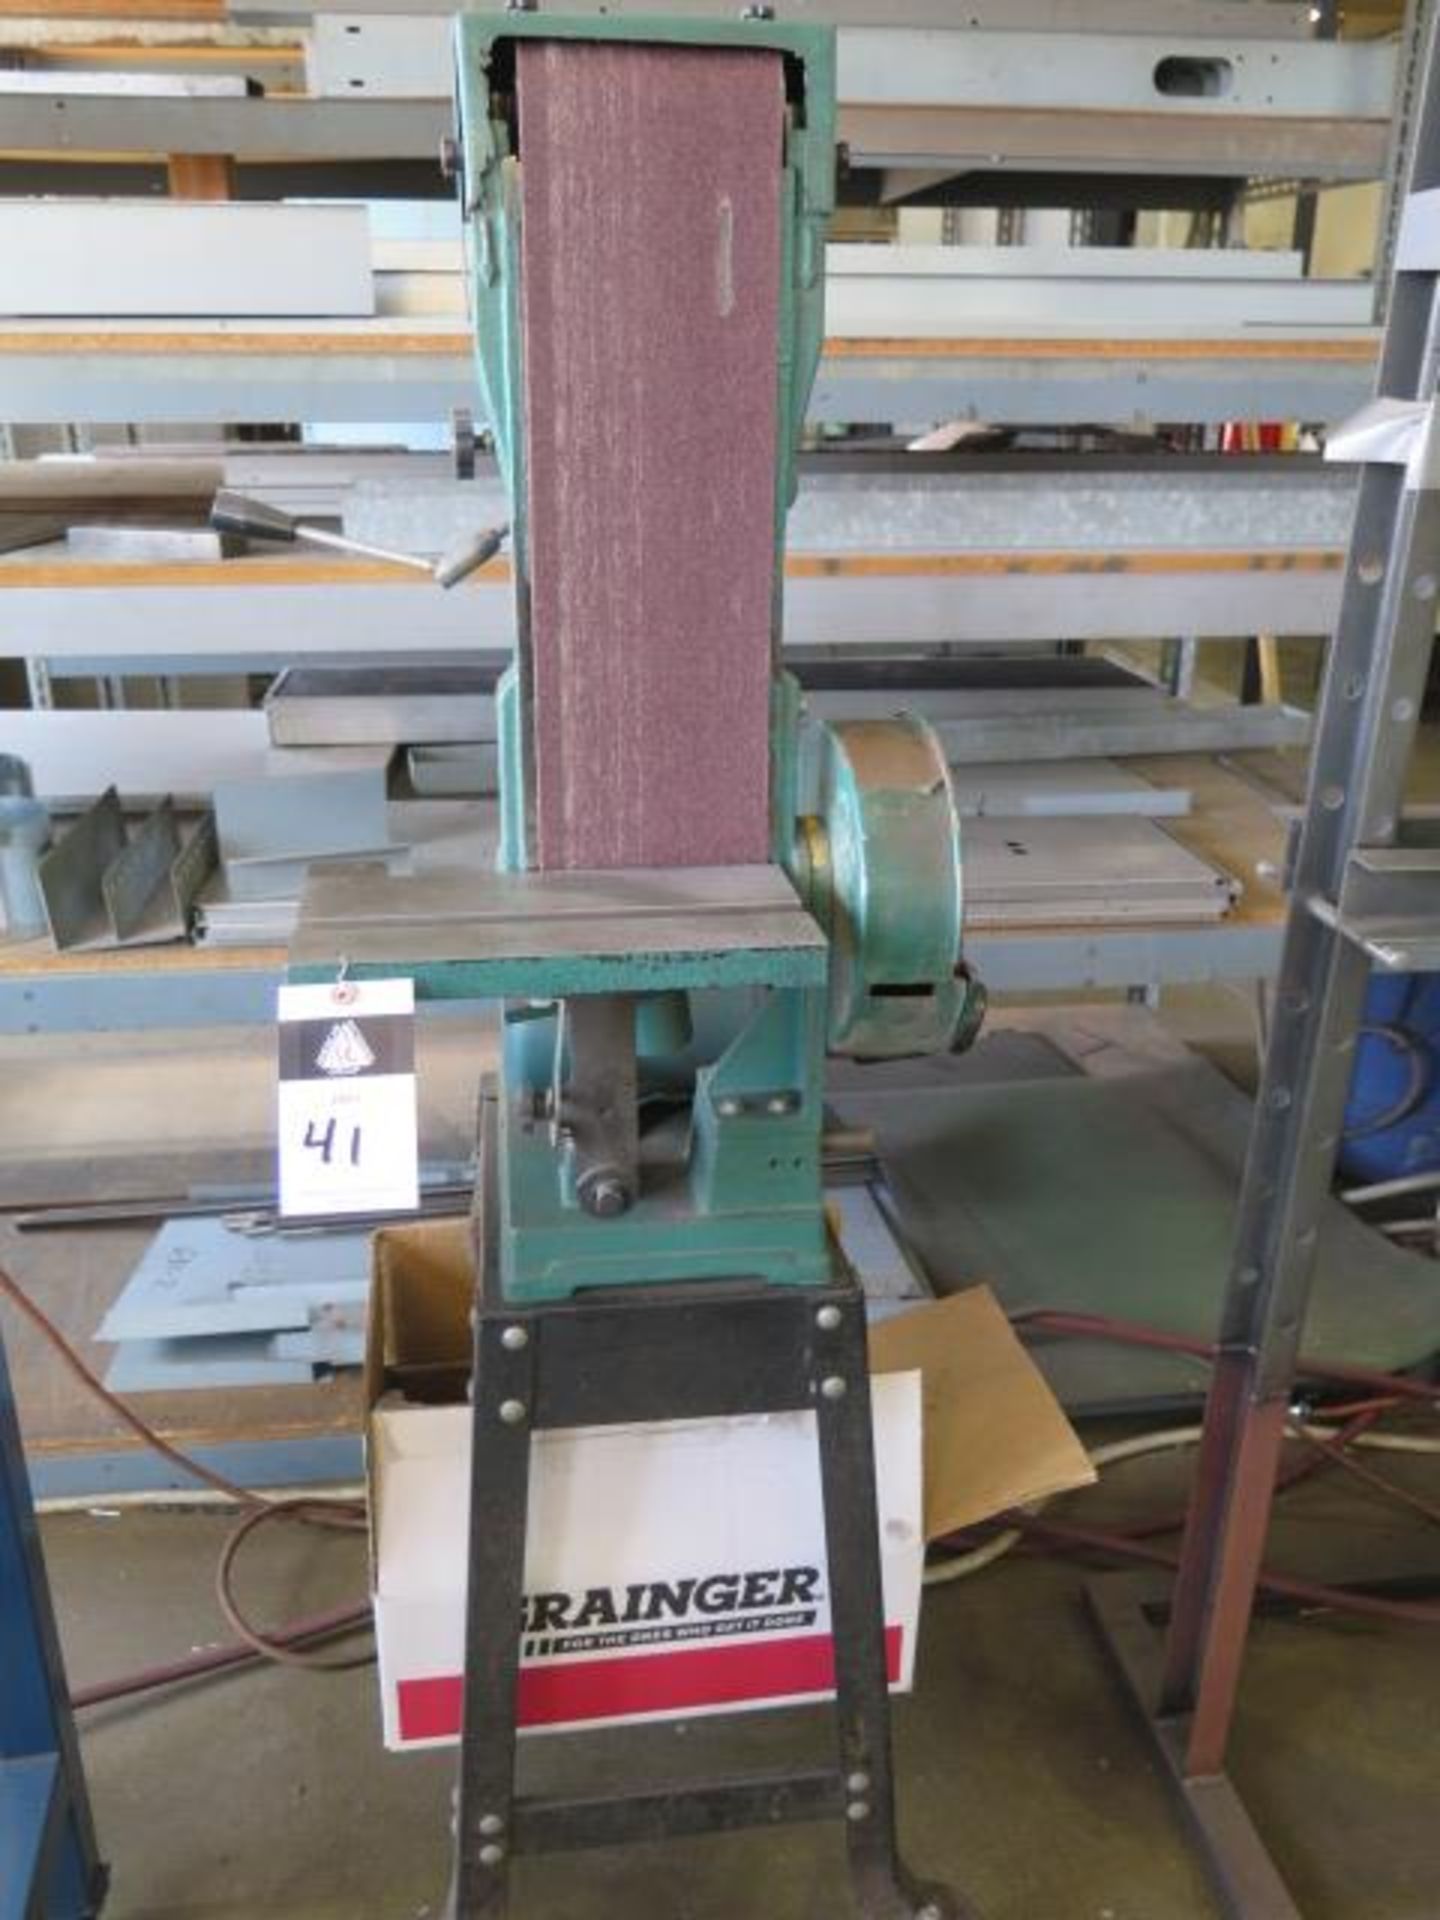 Grizzly mdl. G1014Z 6" Belt / 9" Disc Sander s/n 9-0196 w/ Roll Stand (SOLD AS-IS - NO WARRANTY)